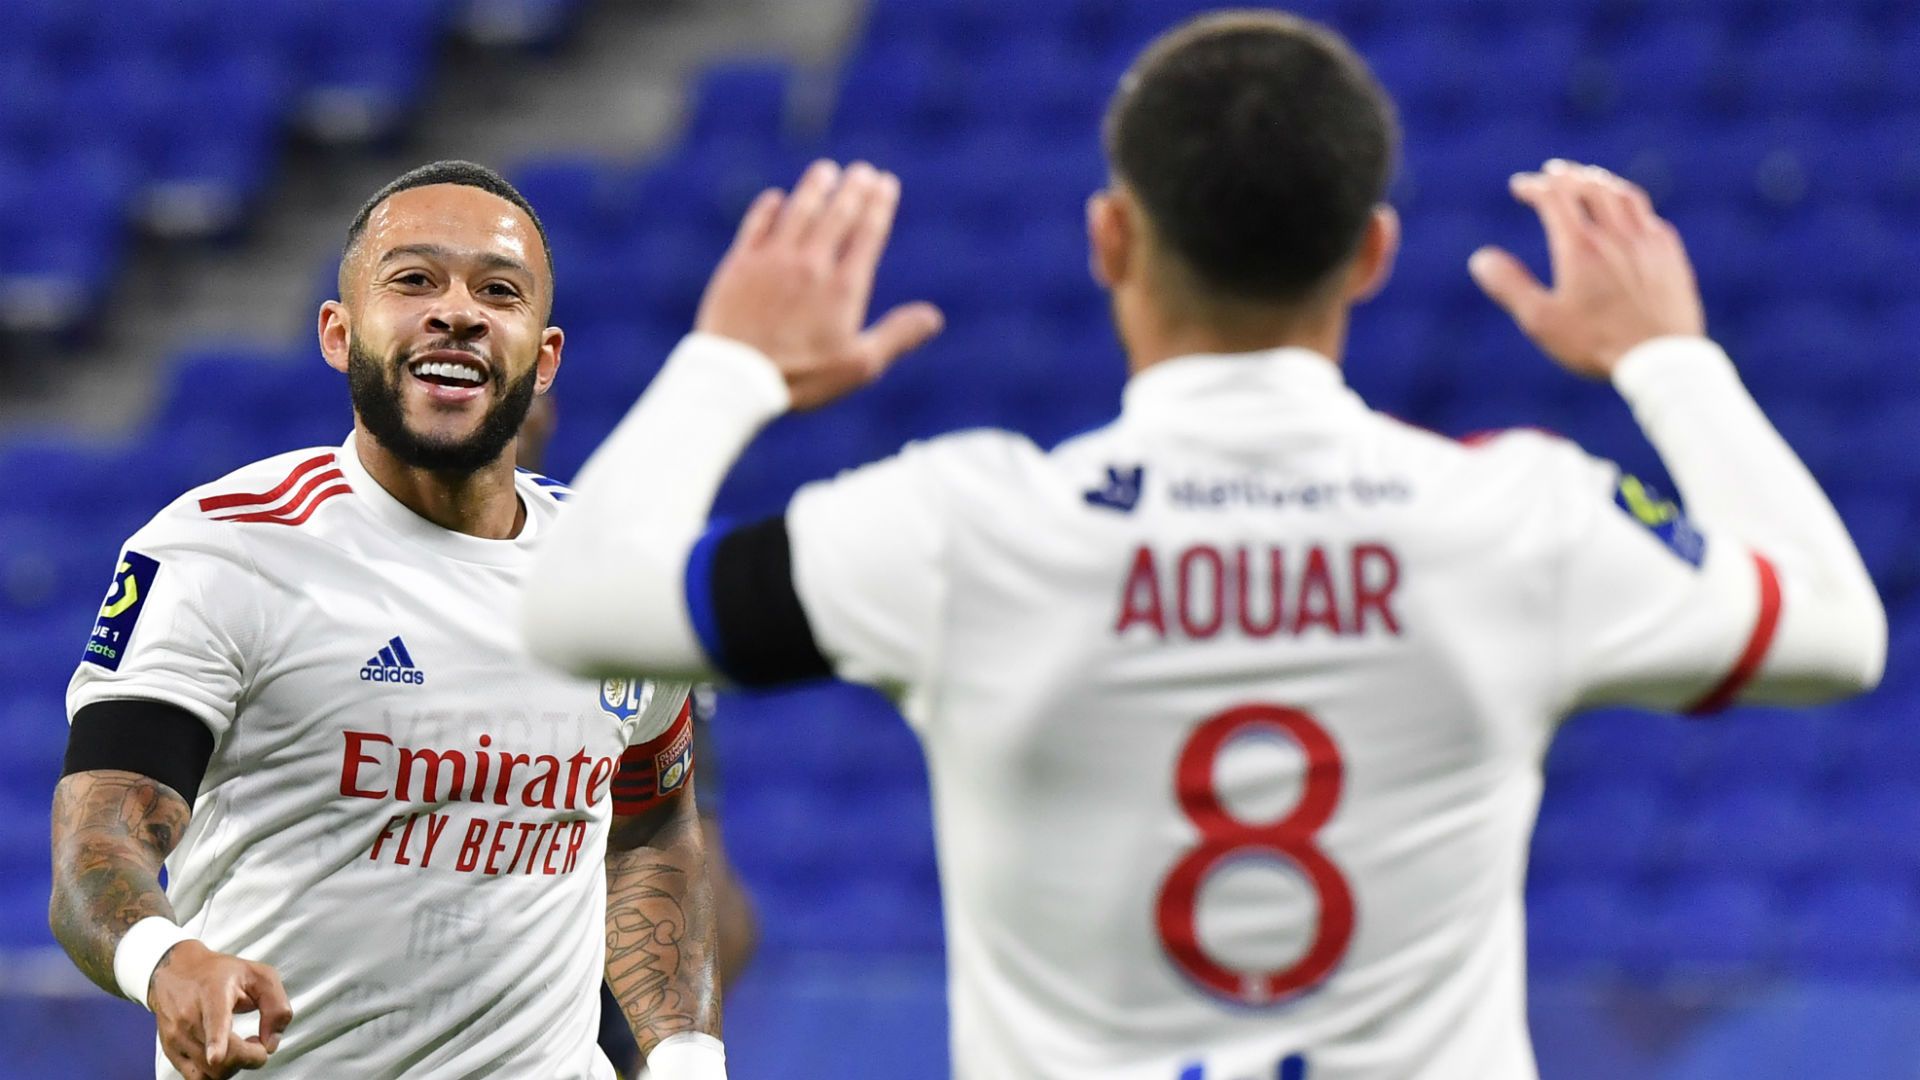 Lyon Star Depay: Aouar And I Want To Play For A Top Three Club In The World